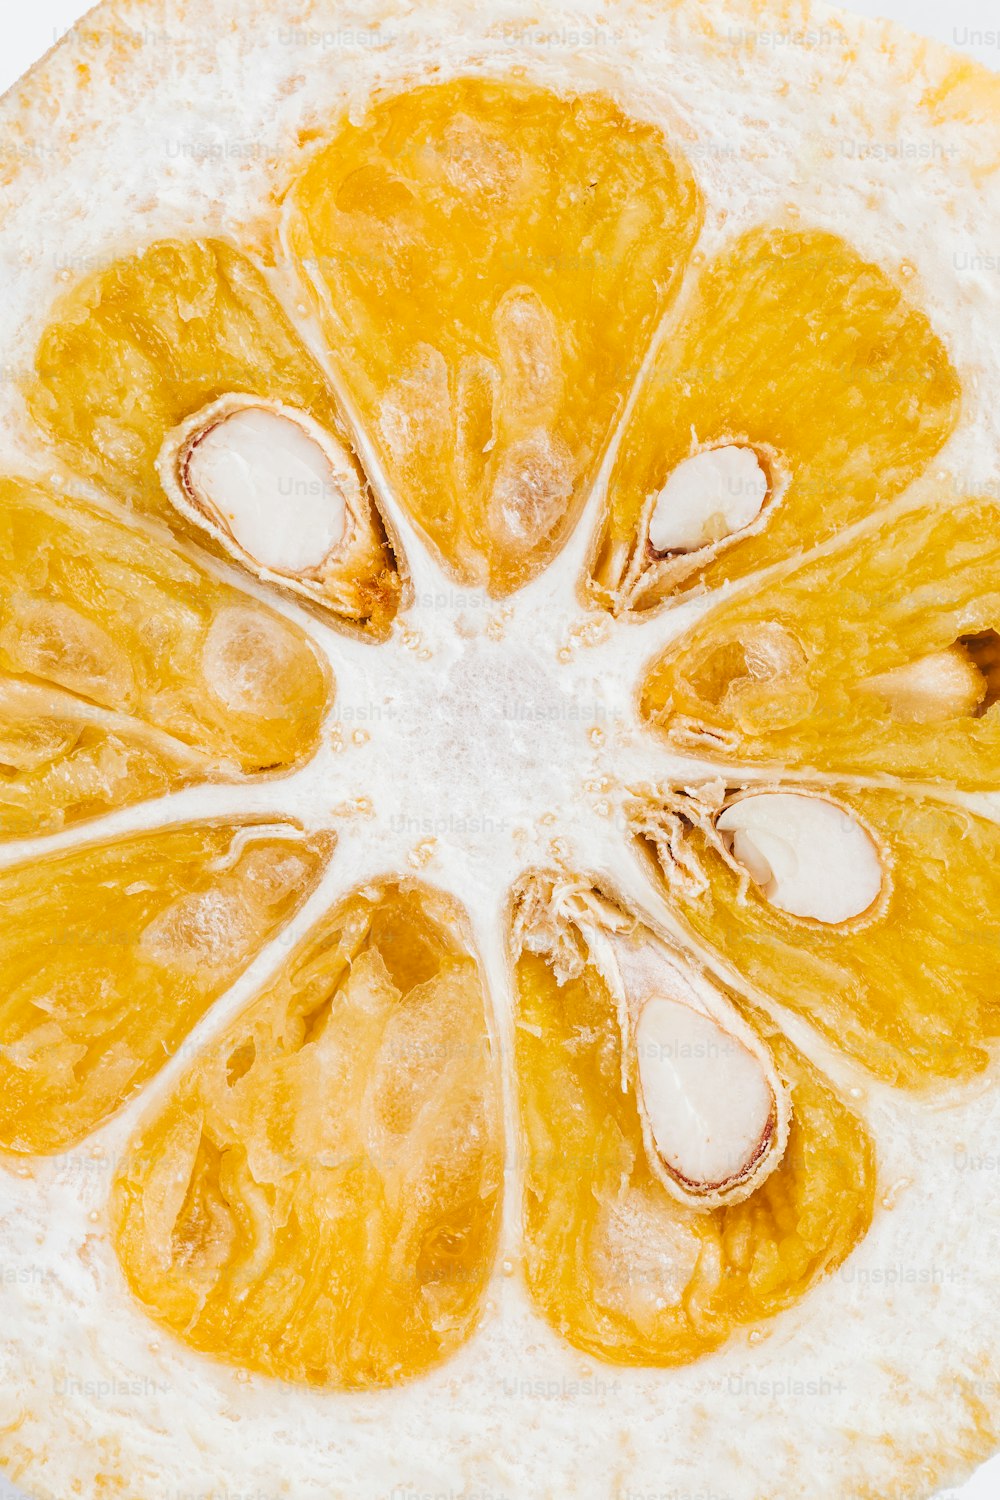 a close up of a sliced orange on a white surface